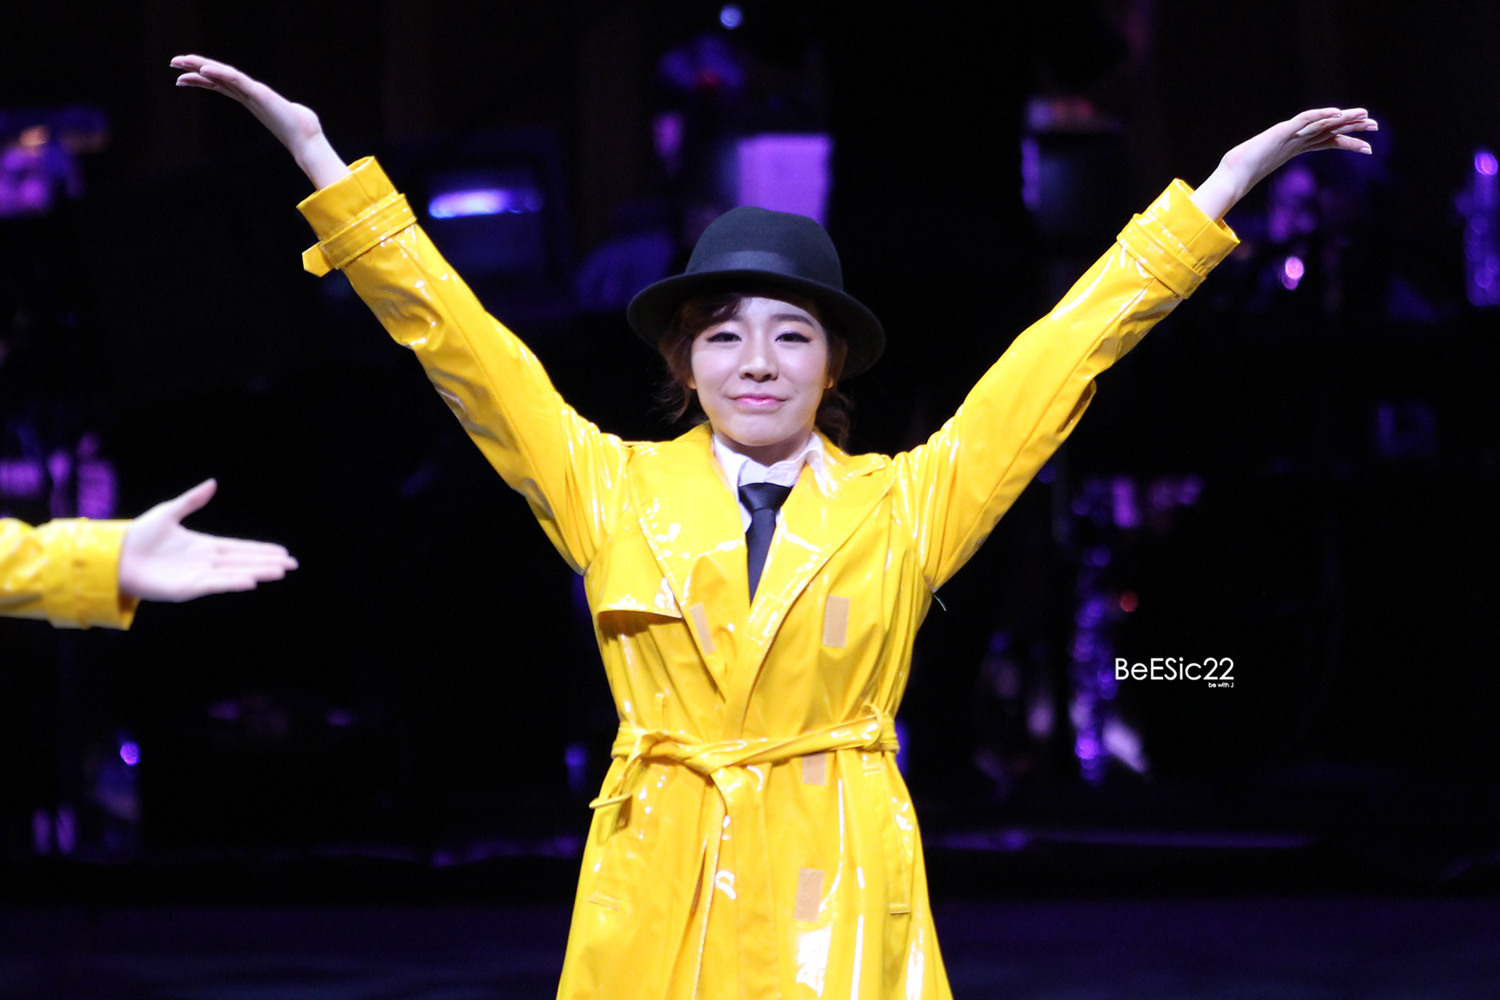 [OTHER][29-04-2014]Sunny sẽ tham gia vở nhạc kịch "SINGIN' IN THE RAIN" - Page 2 2702885053A590F11DE603